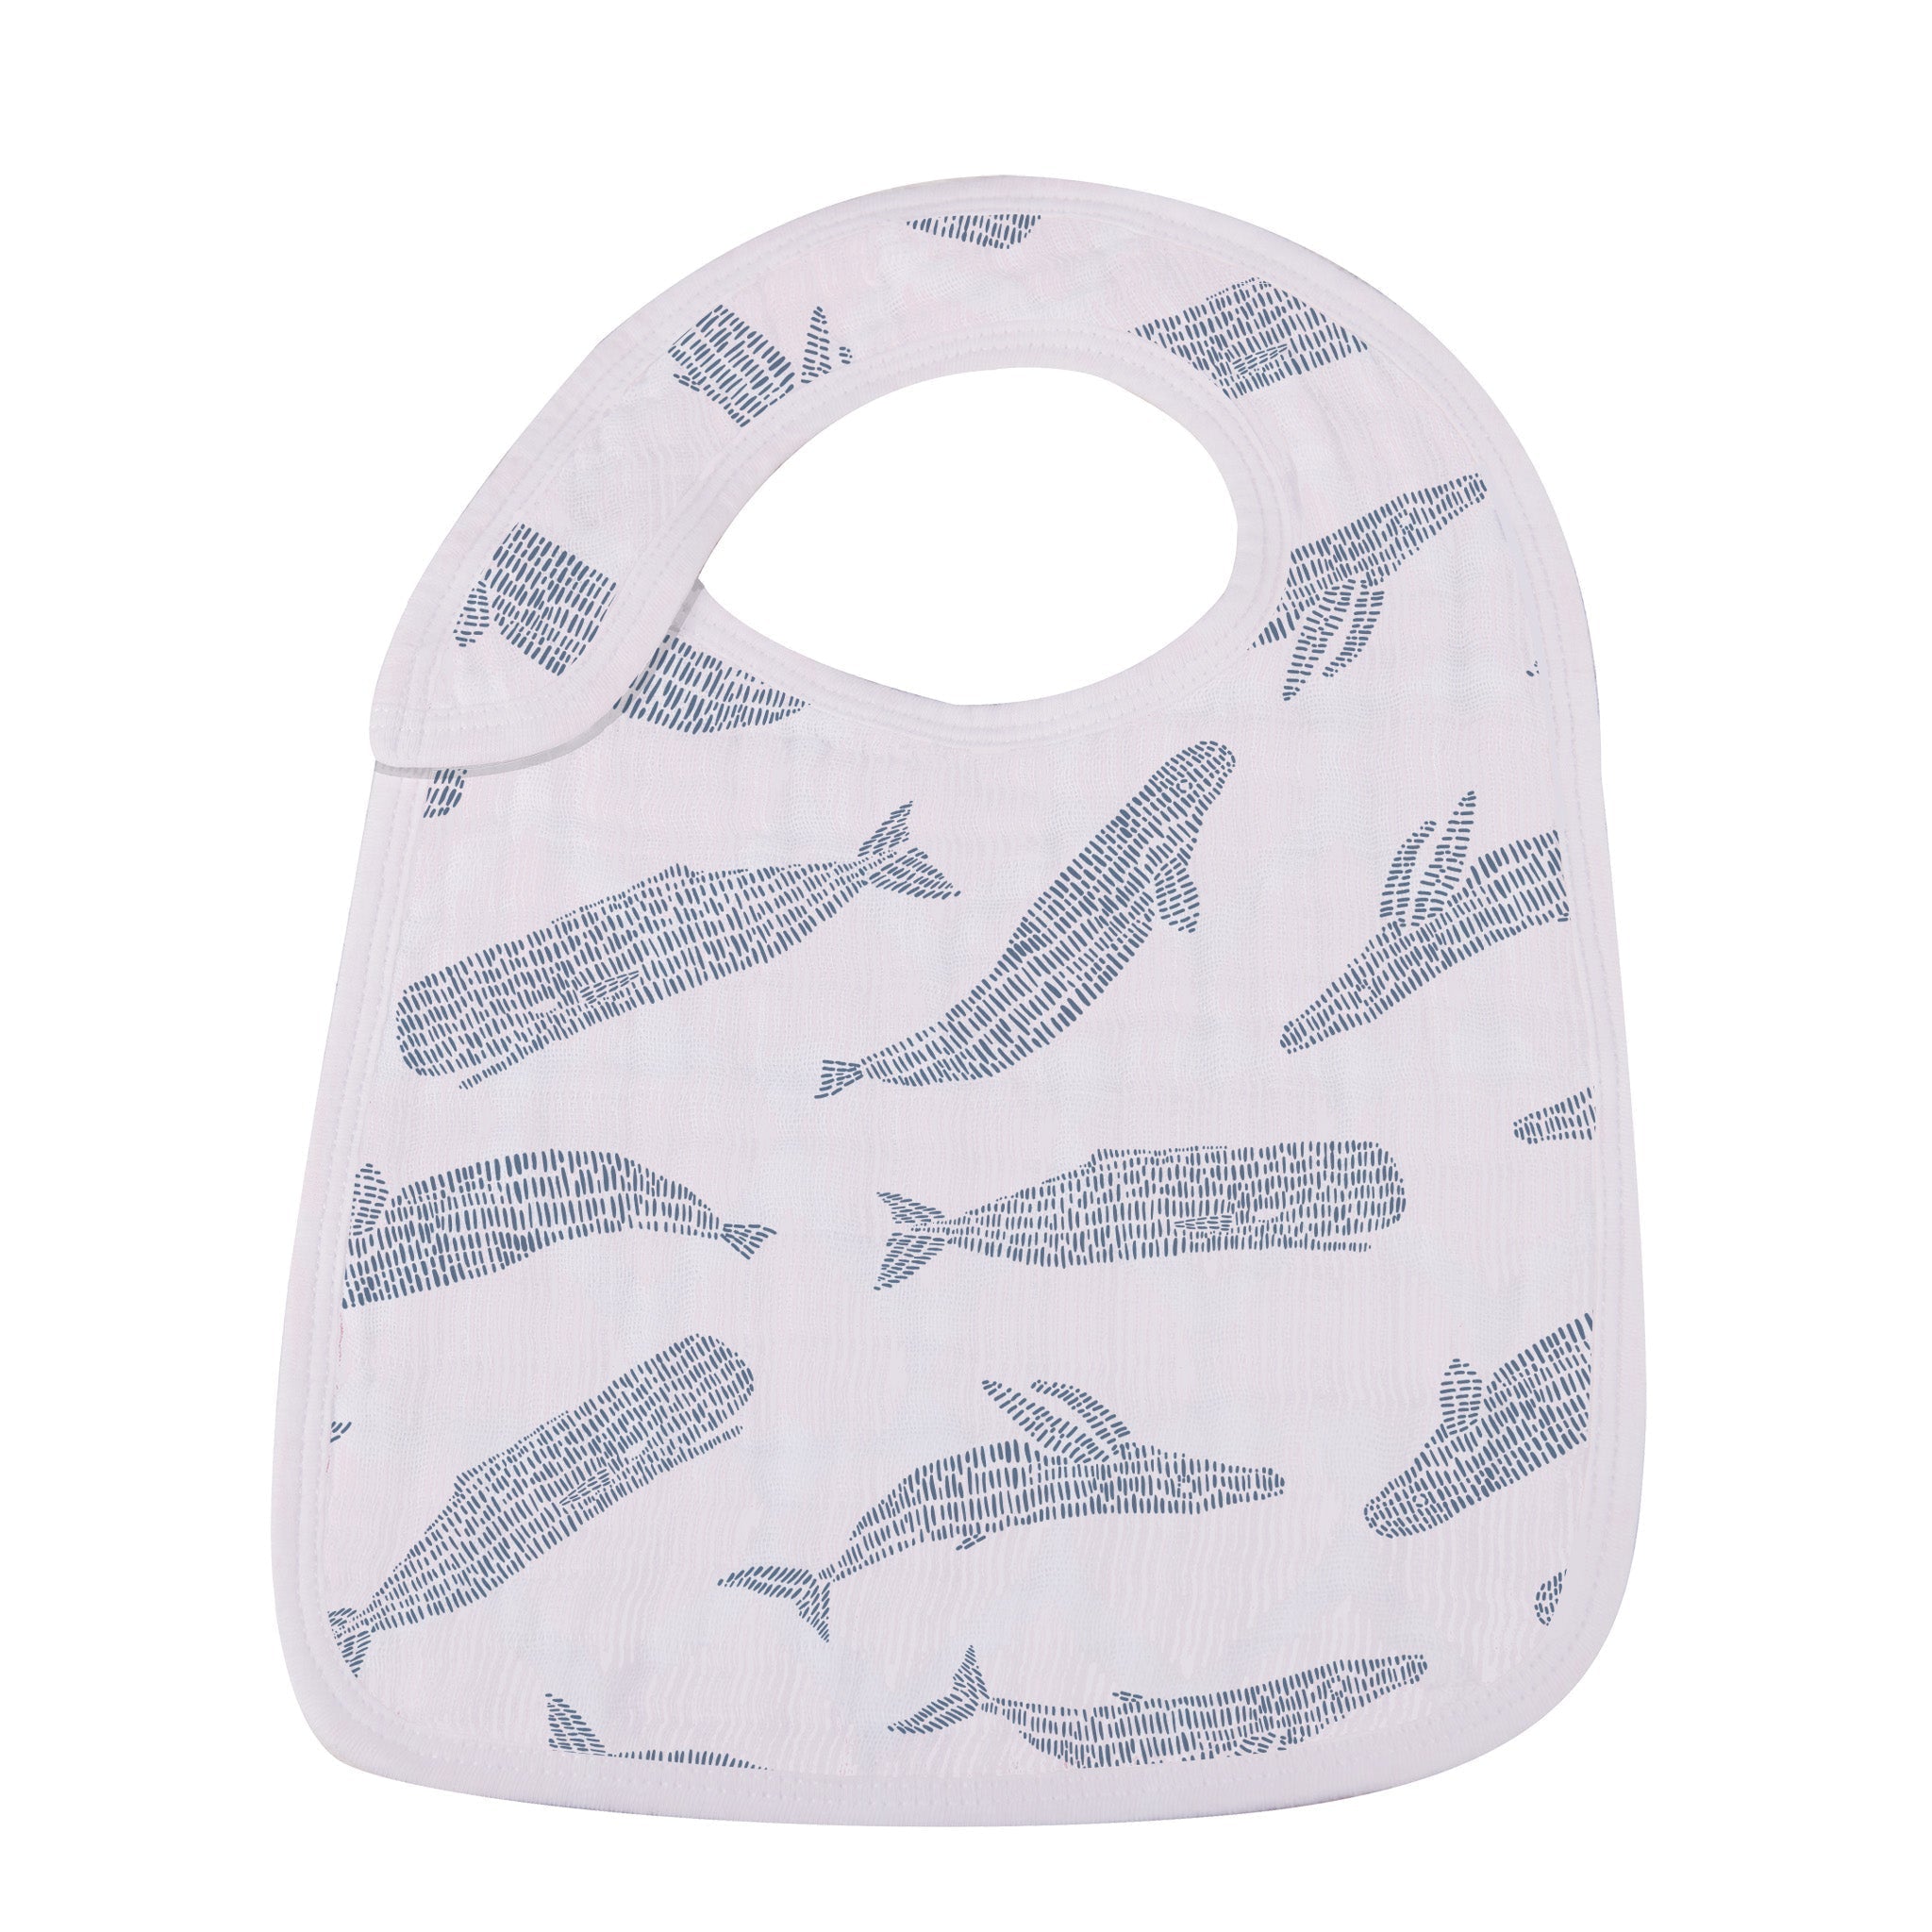 Snap bib with cute whales